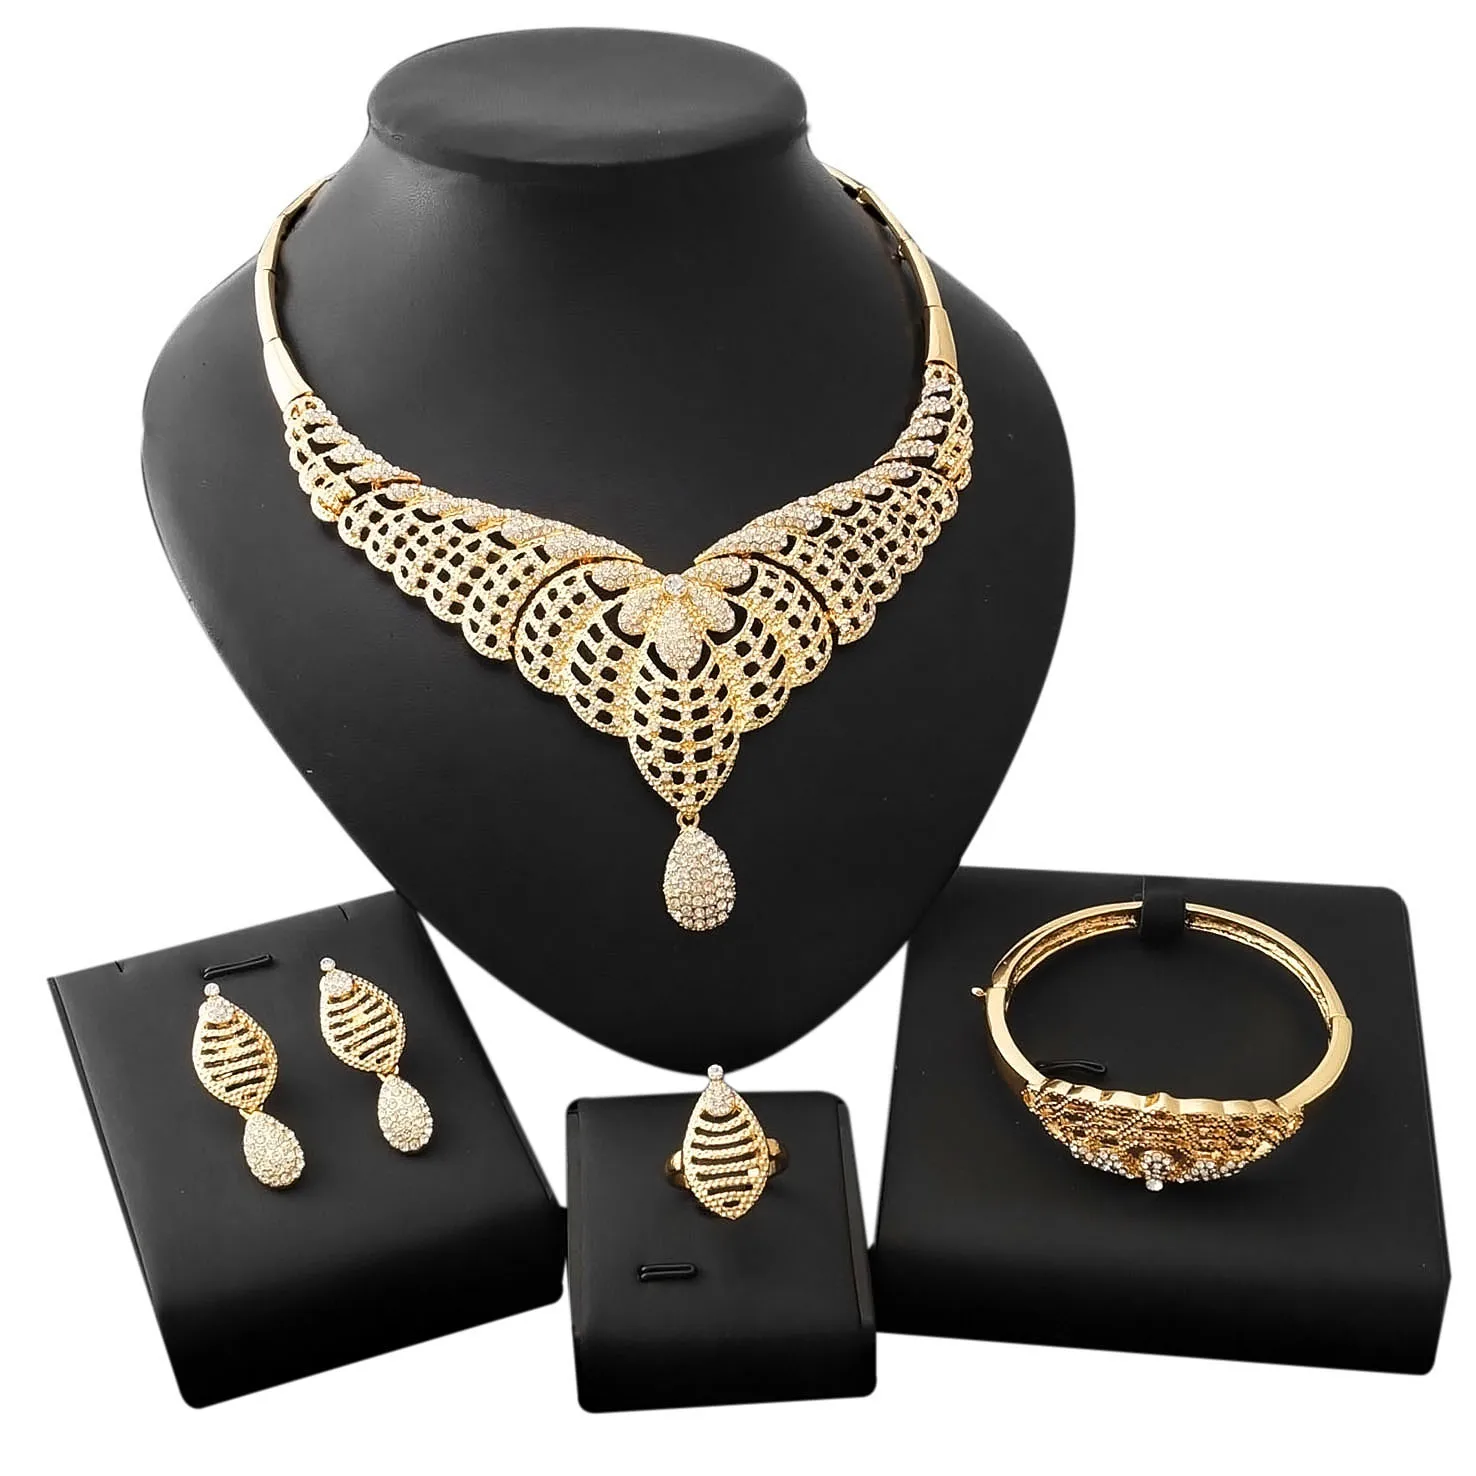 

Yulaili Designed For The Party Beautiful And Noble Gold Plated Gift African Jewelry Set Women's Crystal Necklace Wholesale Sets